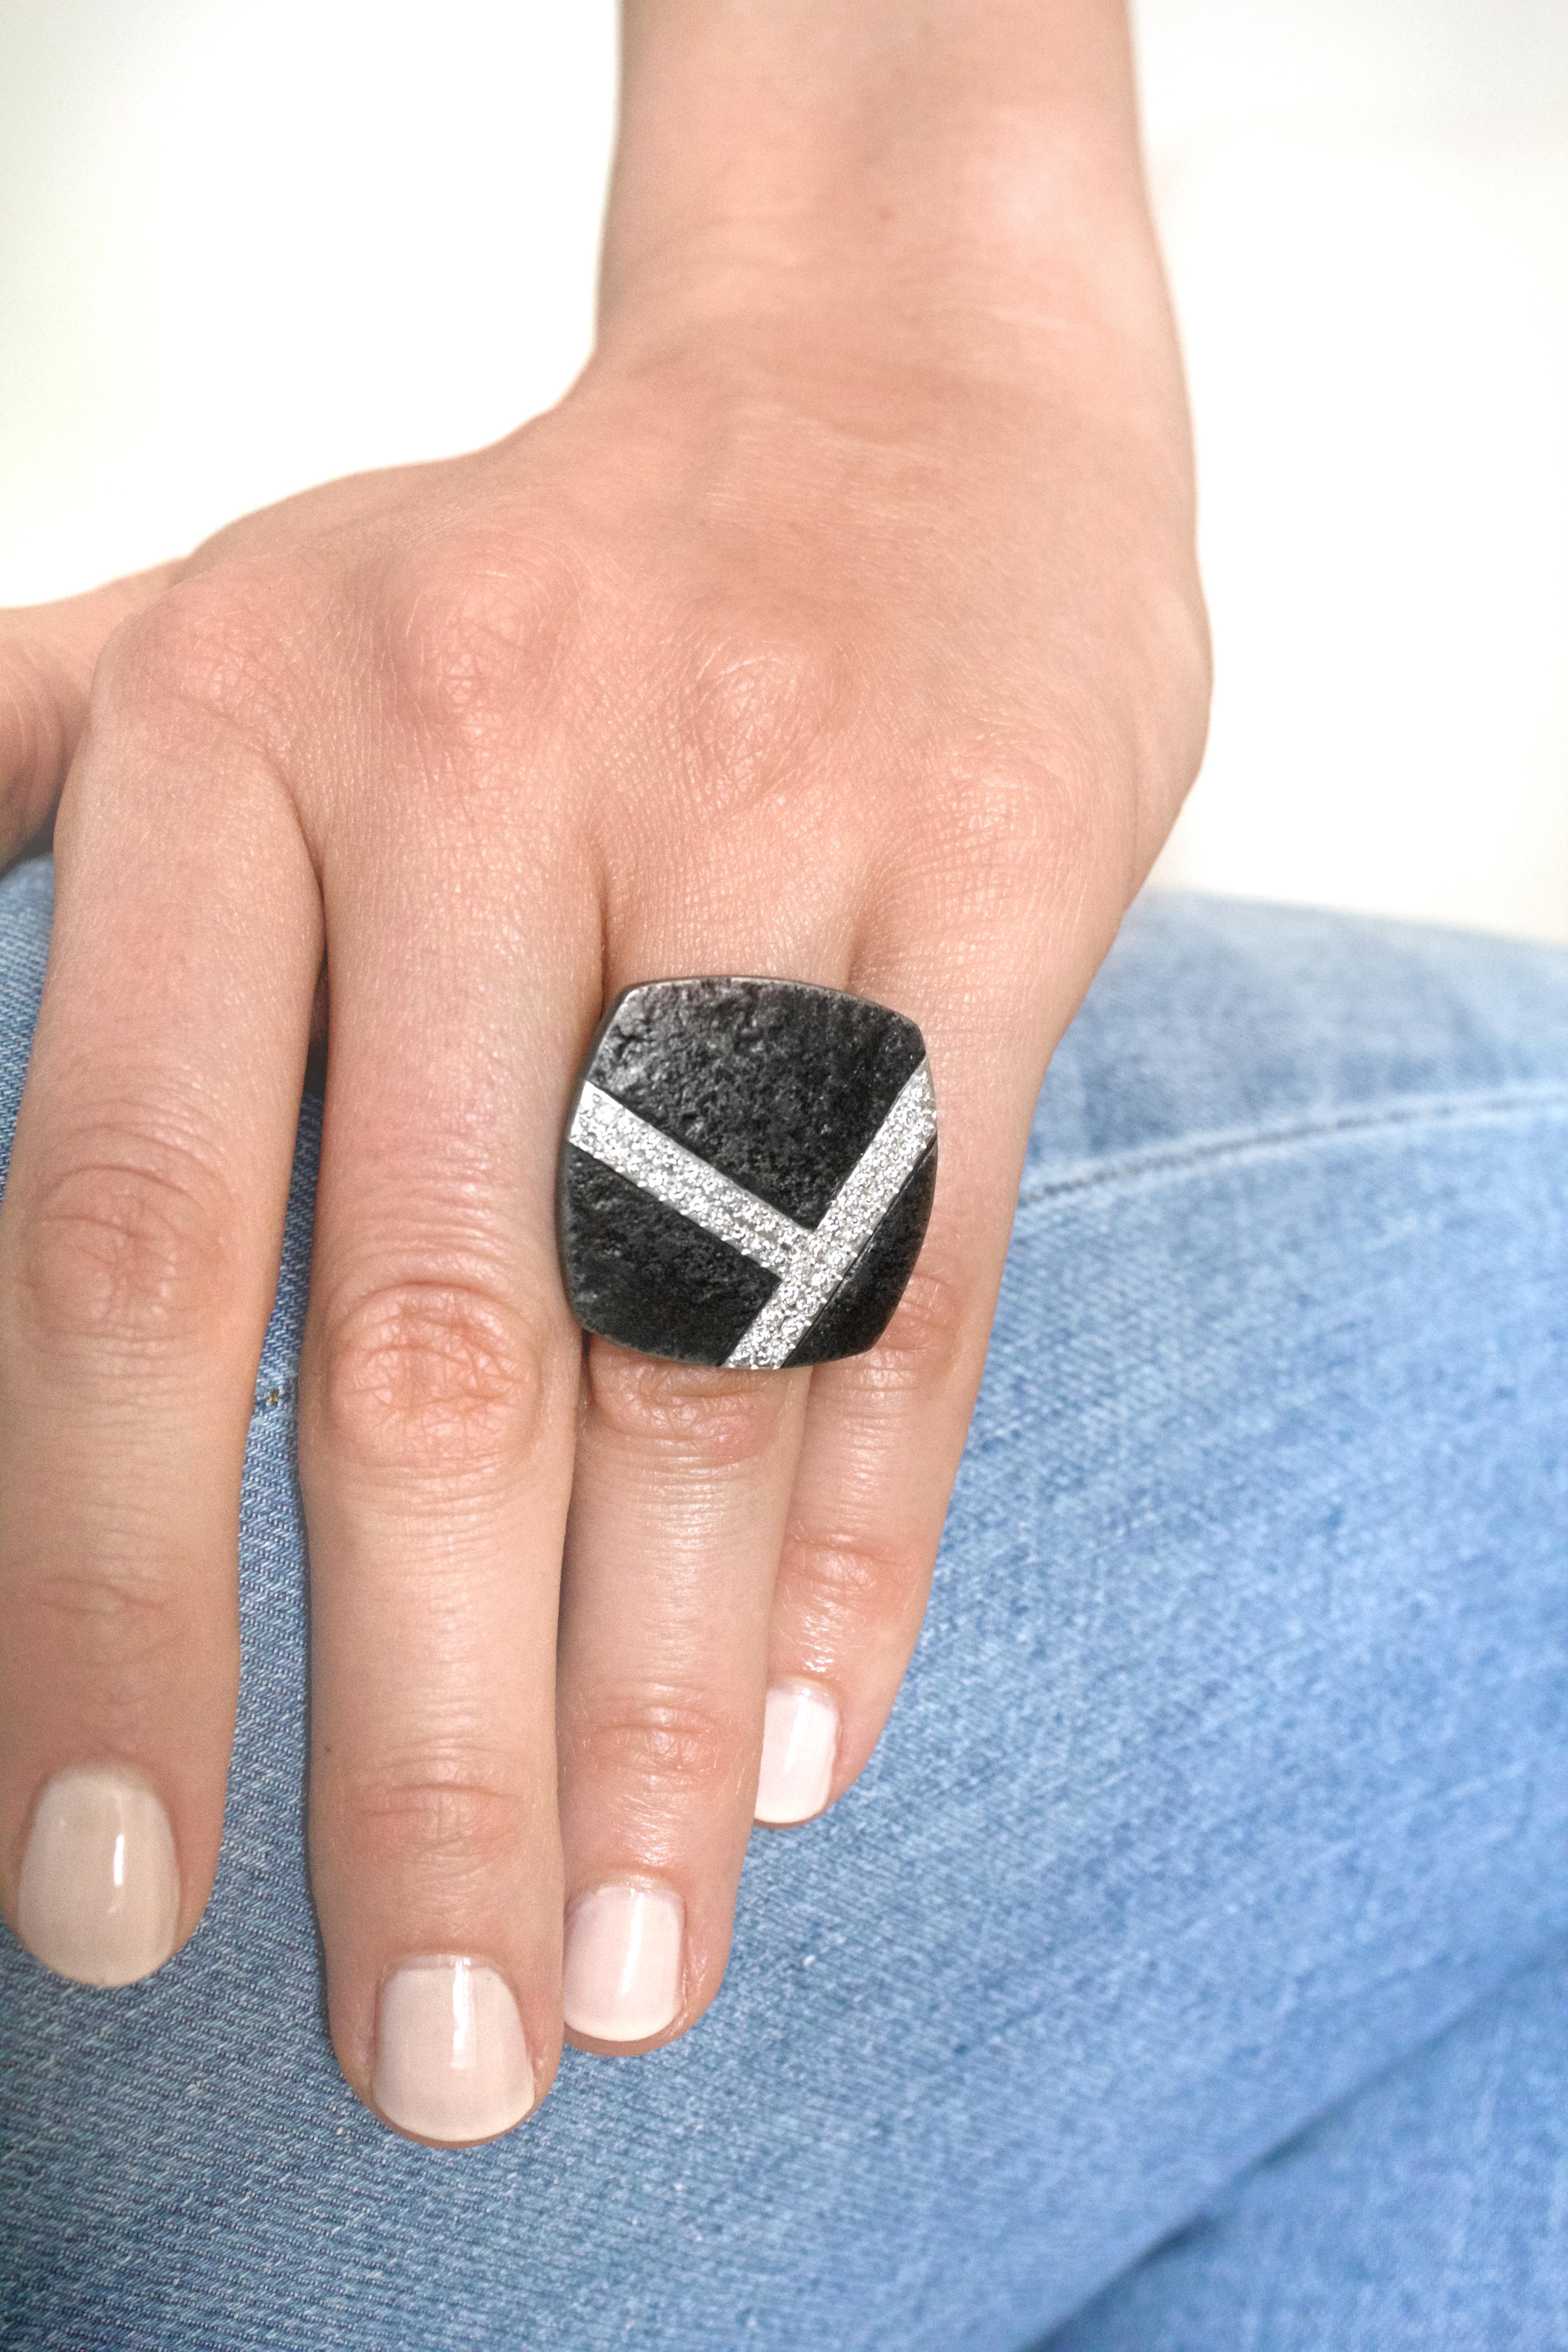 One of a Kind Cube Ring by award-winning jewelry artist Jaclyn Davidson hand-forged in weathered carbon steel featuring 0.70 total carats of shimmering round brilliant-cut F/vs1 white diamonds beautifully-set in 18k white gold atop an 18k yellow